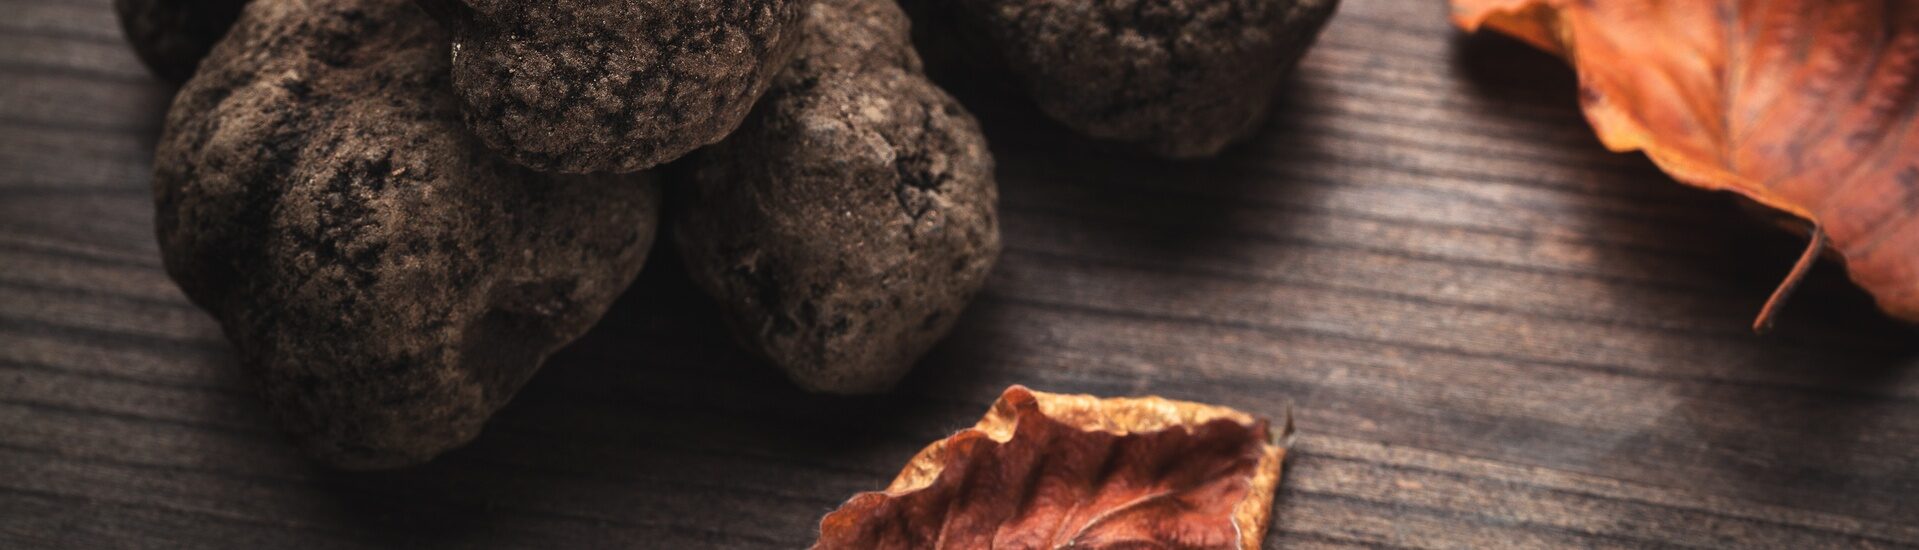 Jim Trappe On the First Truffle Congress